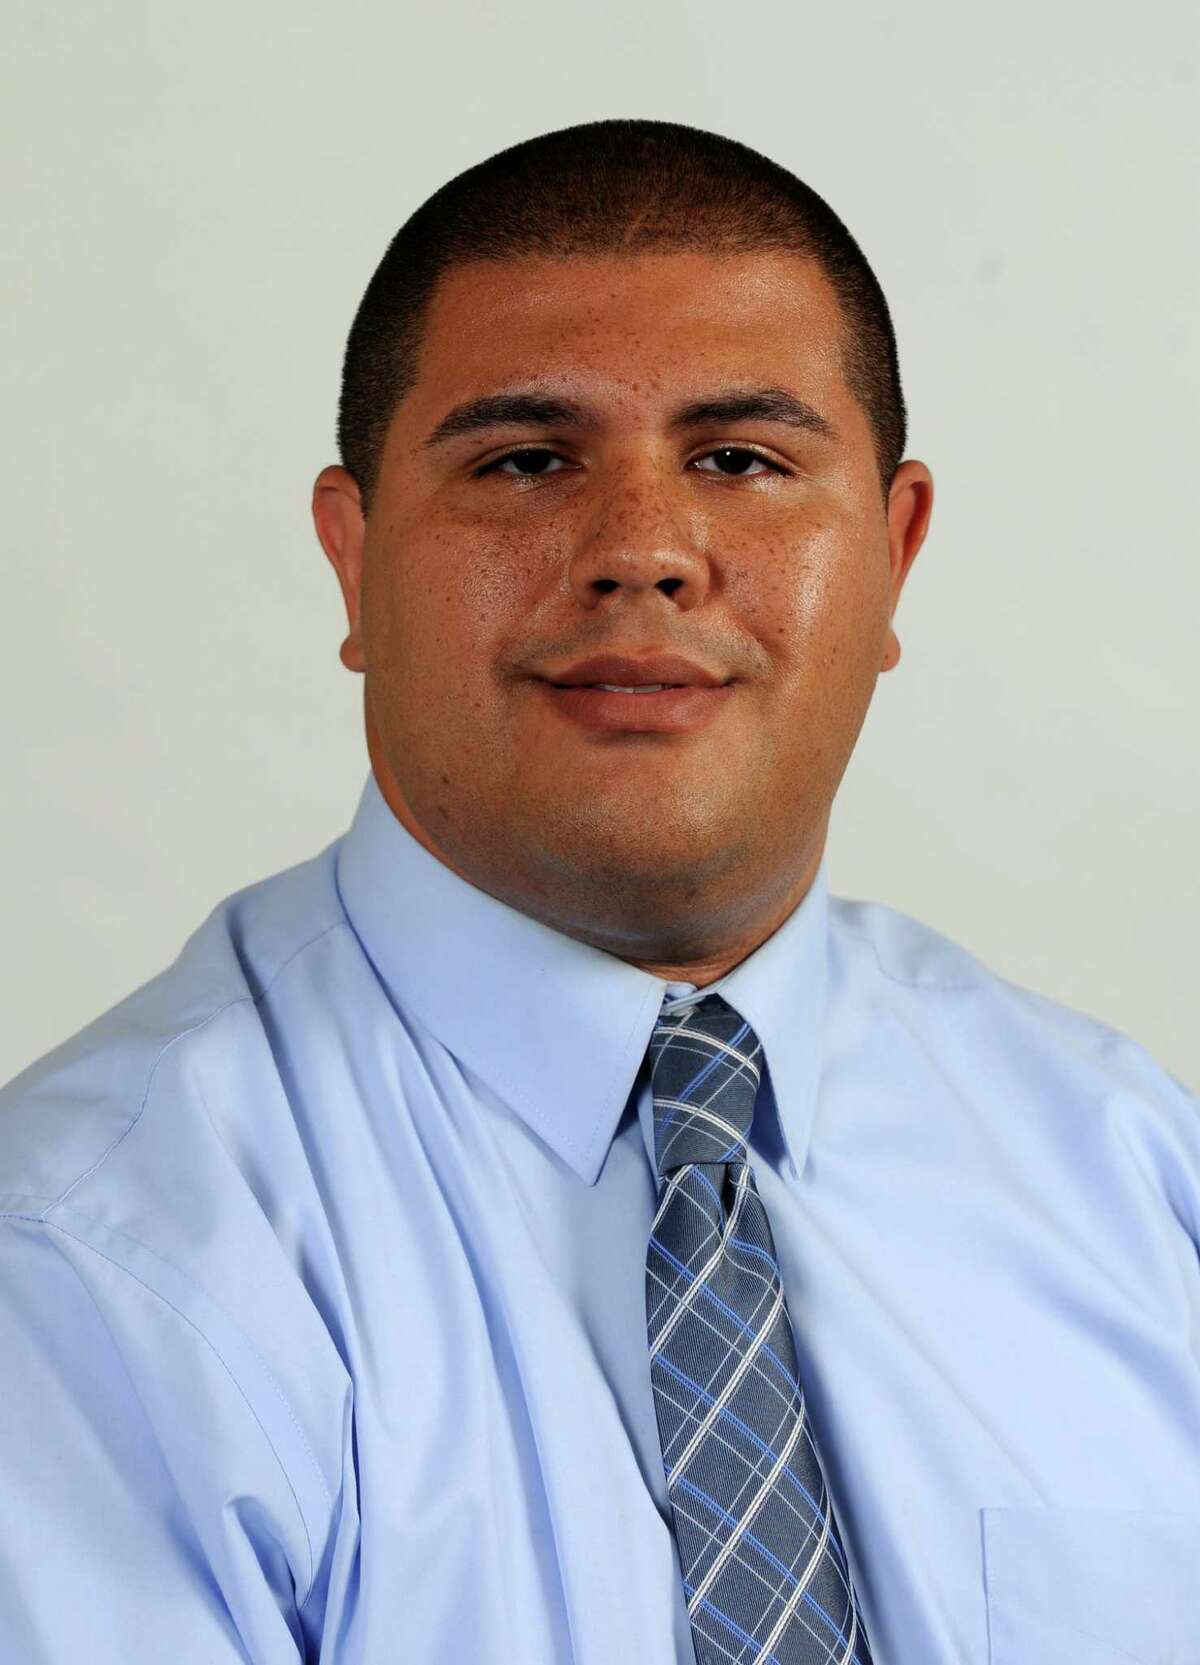 Chris Rosario is a state representative of the 128th District of Bridgeport.